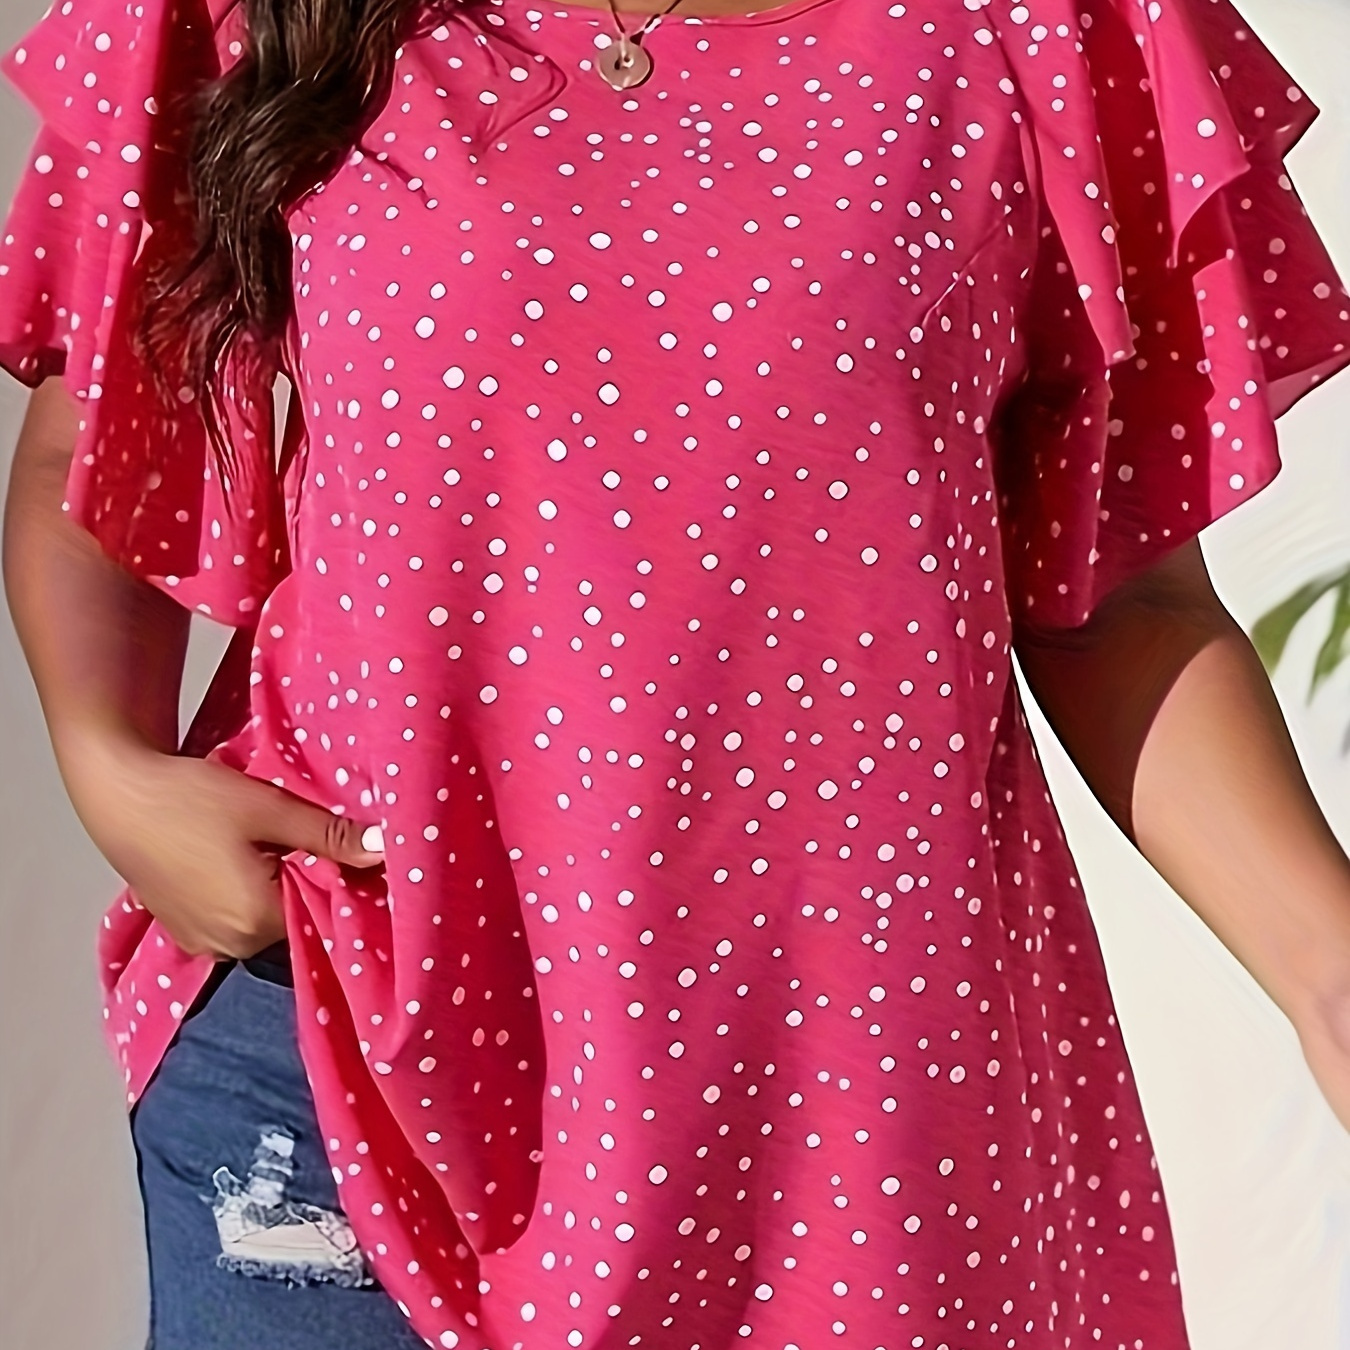 

Plus Size Polka Dots Print Blouse, Casual Crew Neck Layered Ruffle Sleeve Blouse For Spring & Summer, Women's Plus Size Clothing